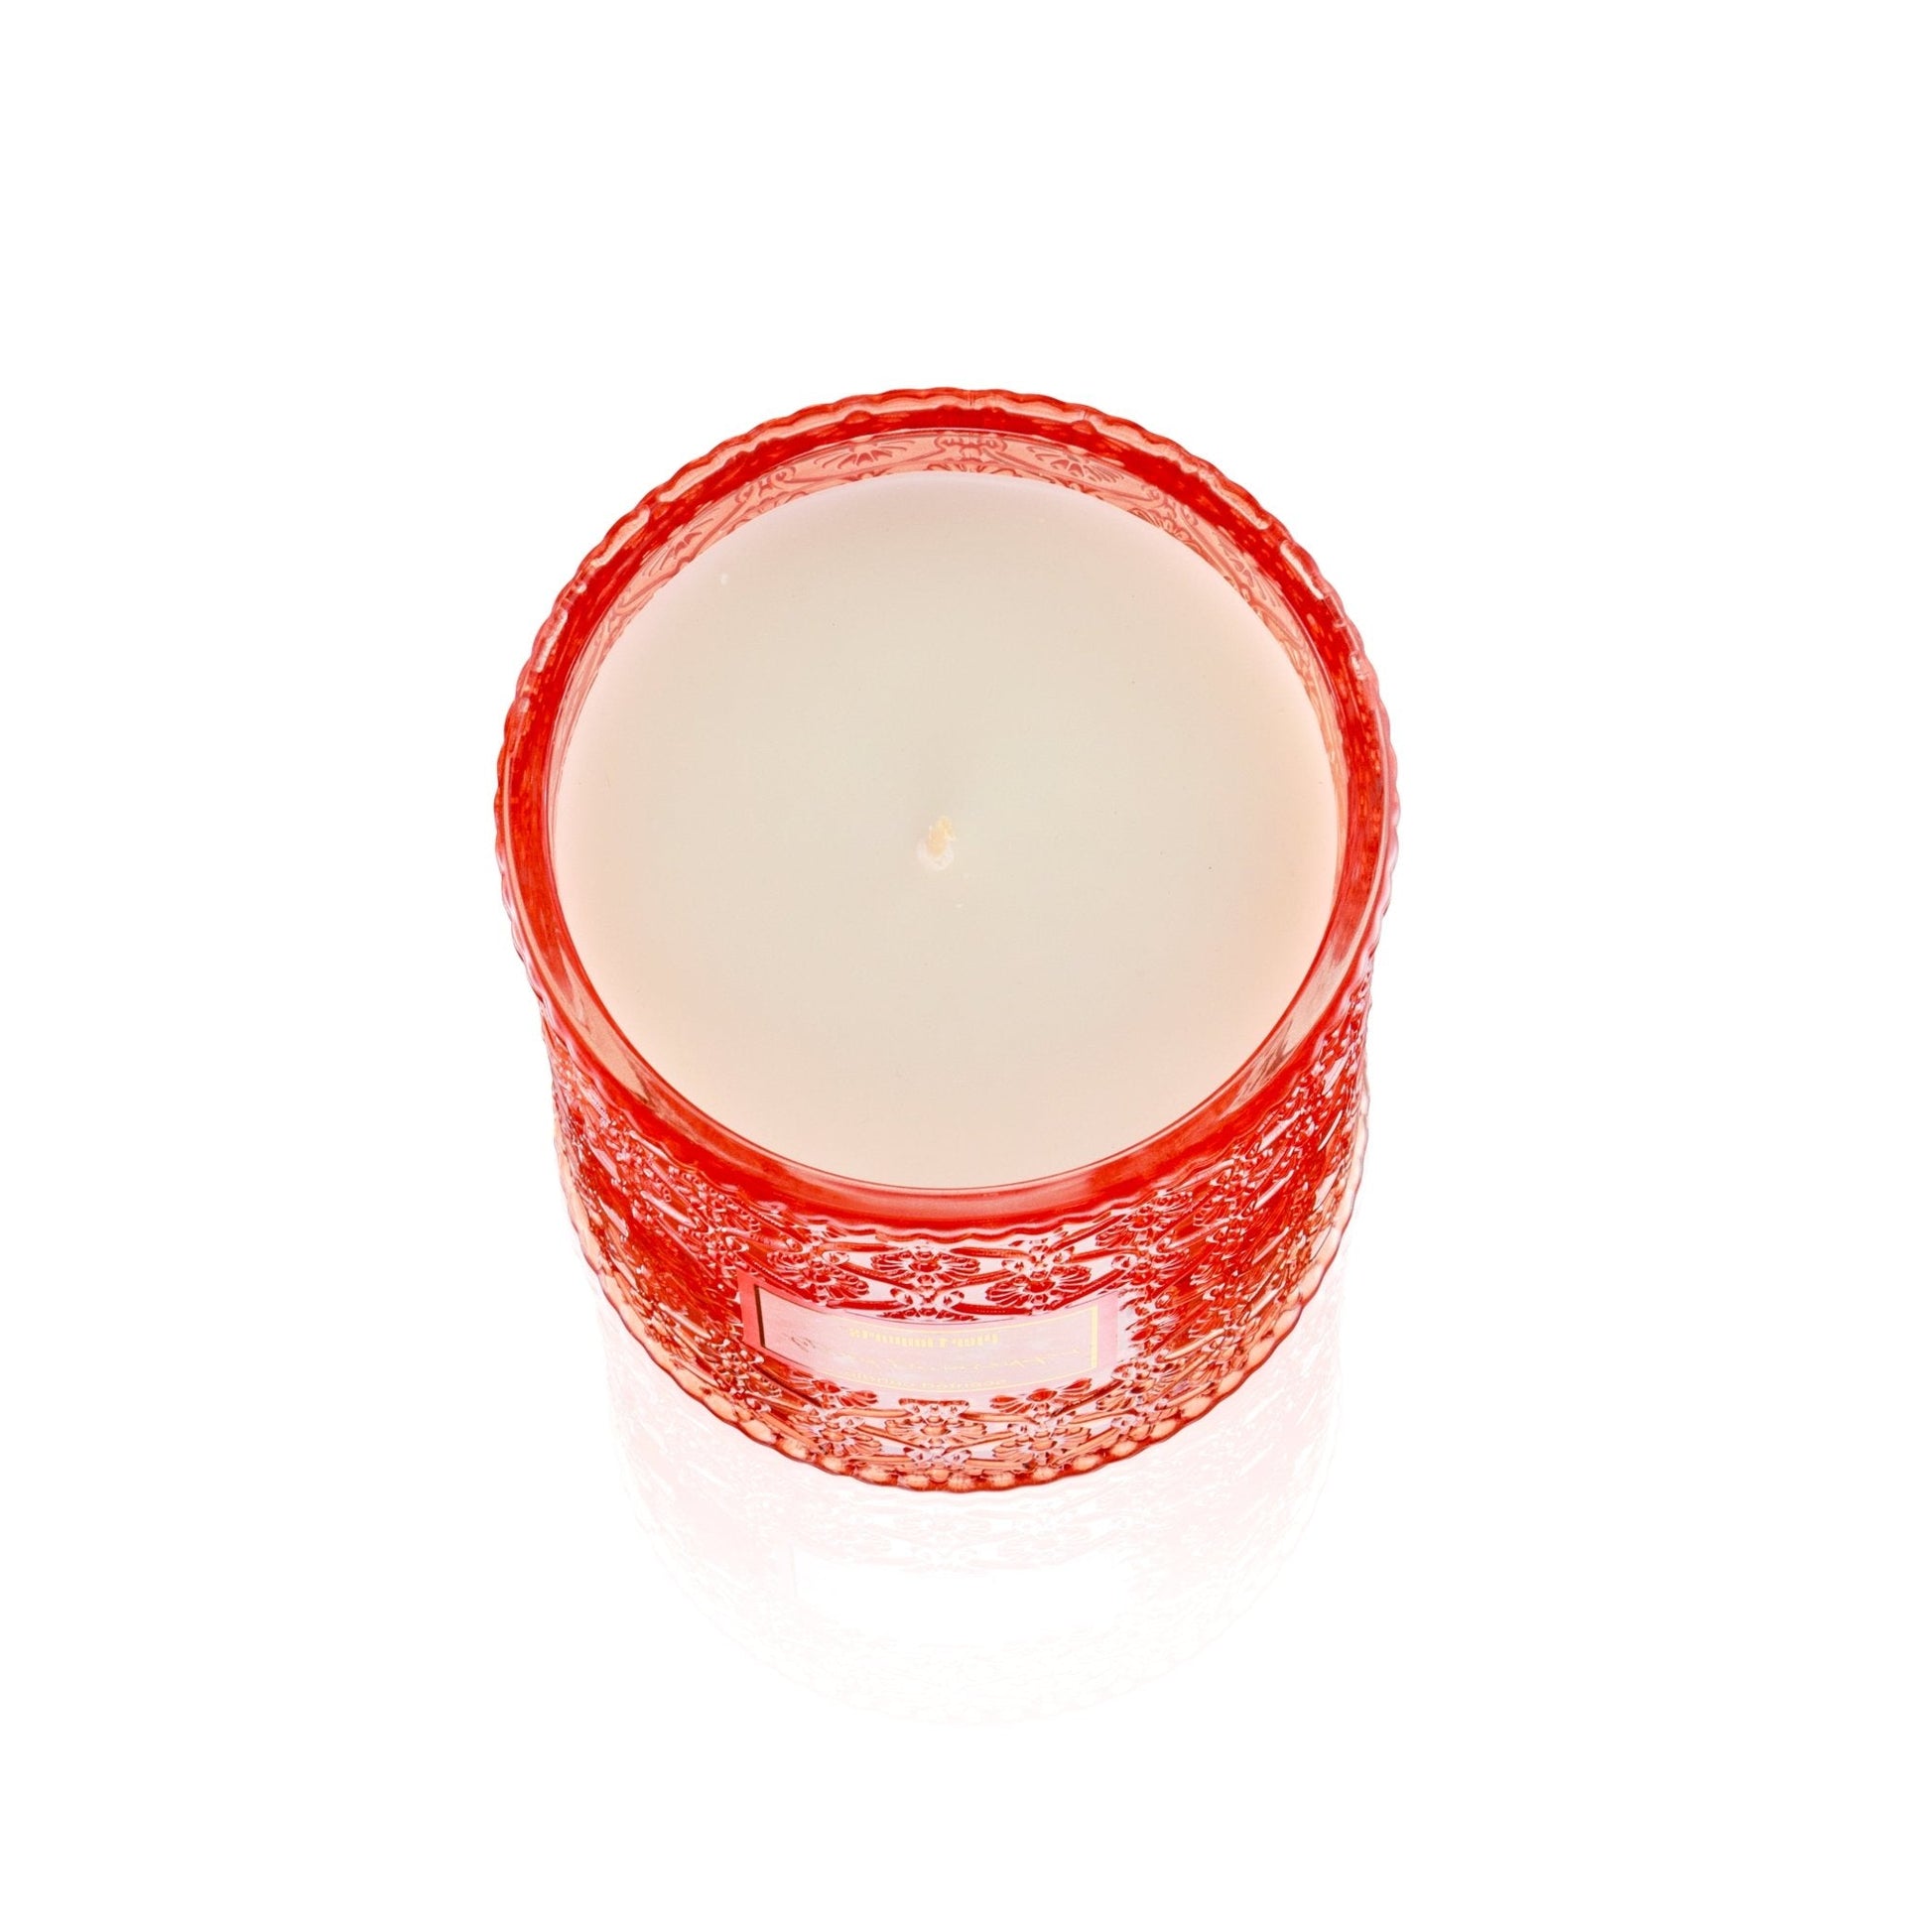 Pier 1 Peppermint Party Luxe 19oz Filled Candle - Pier 1